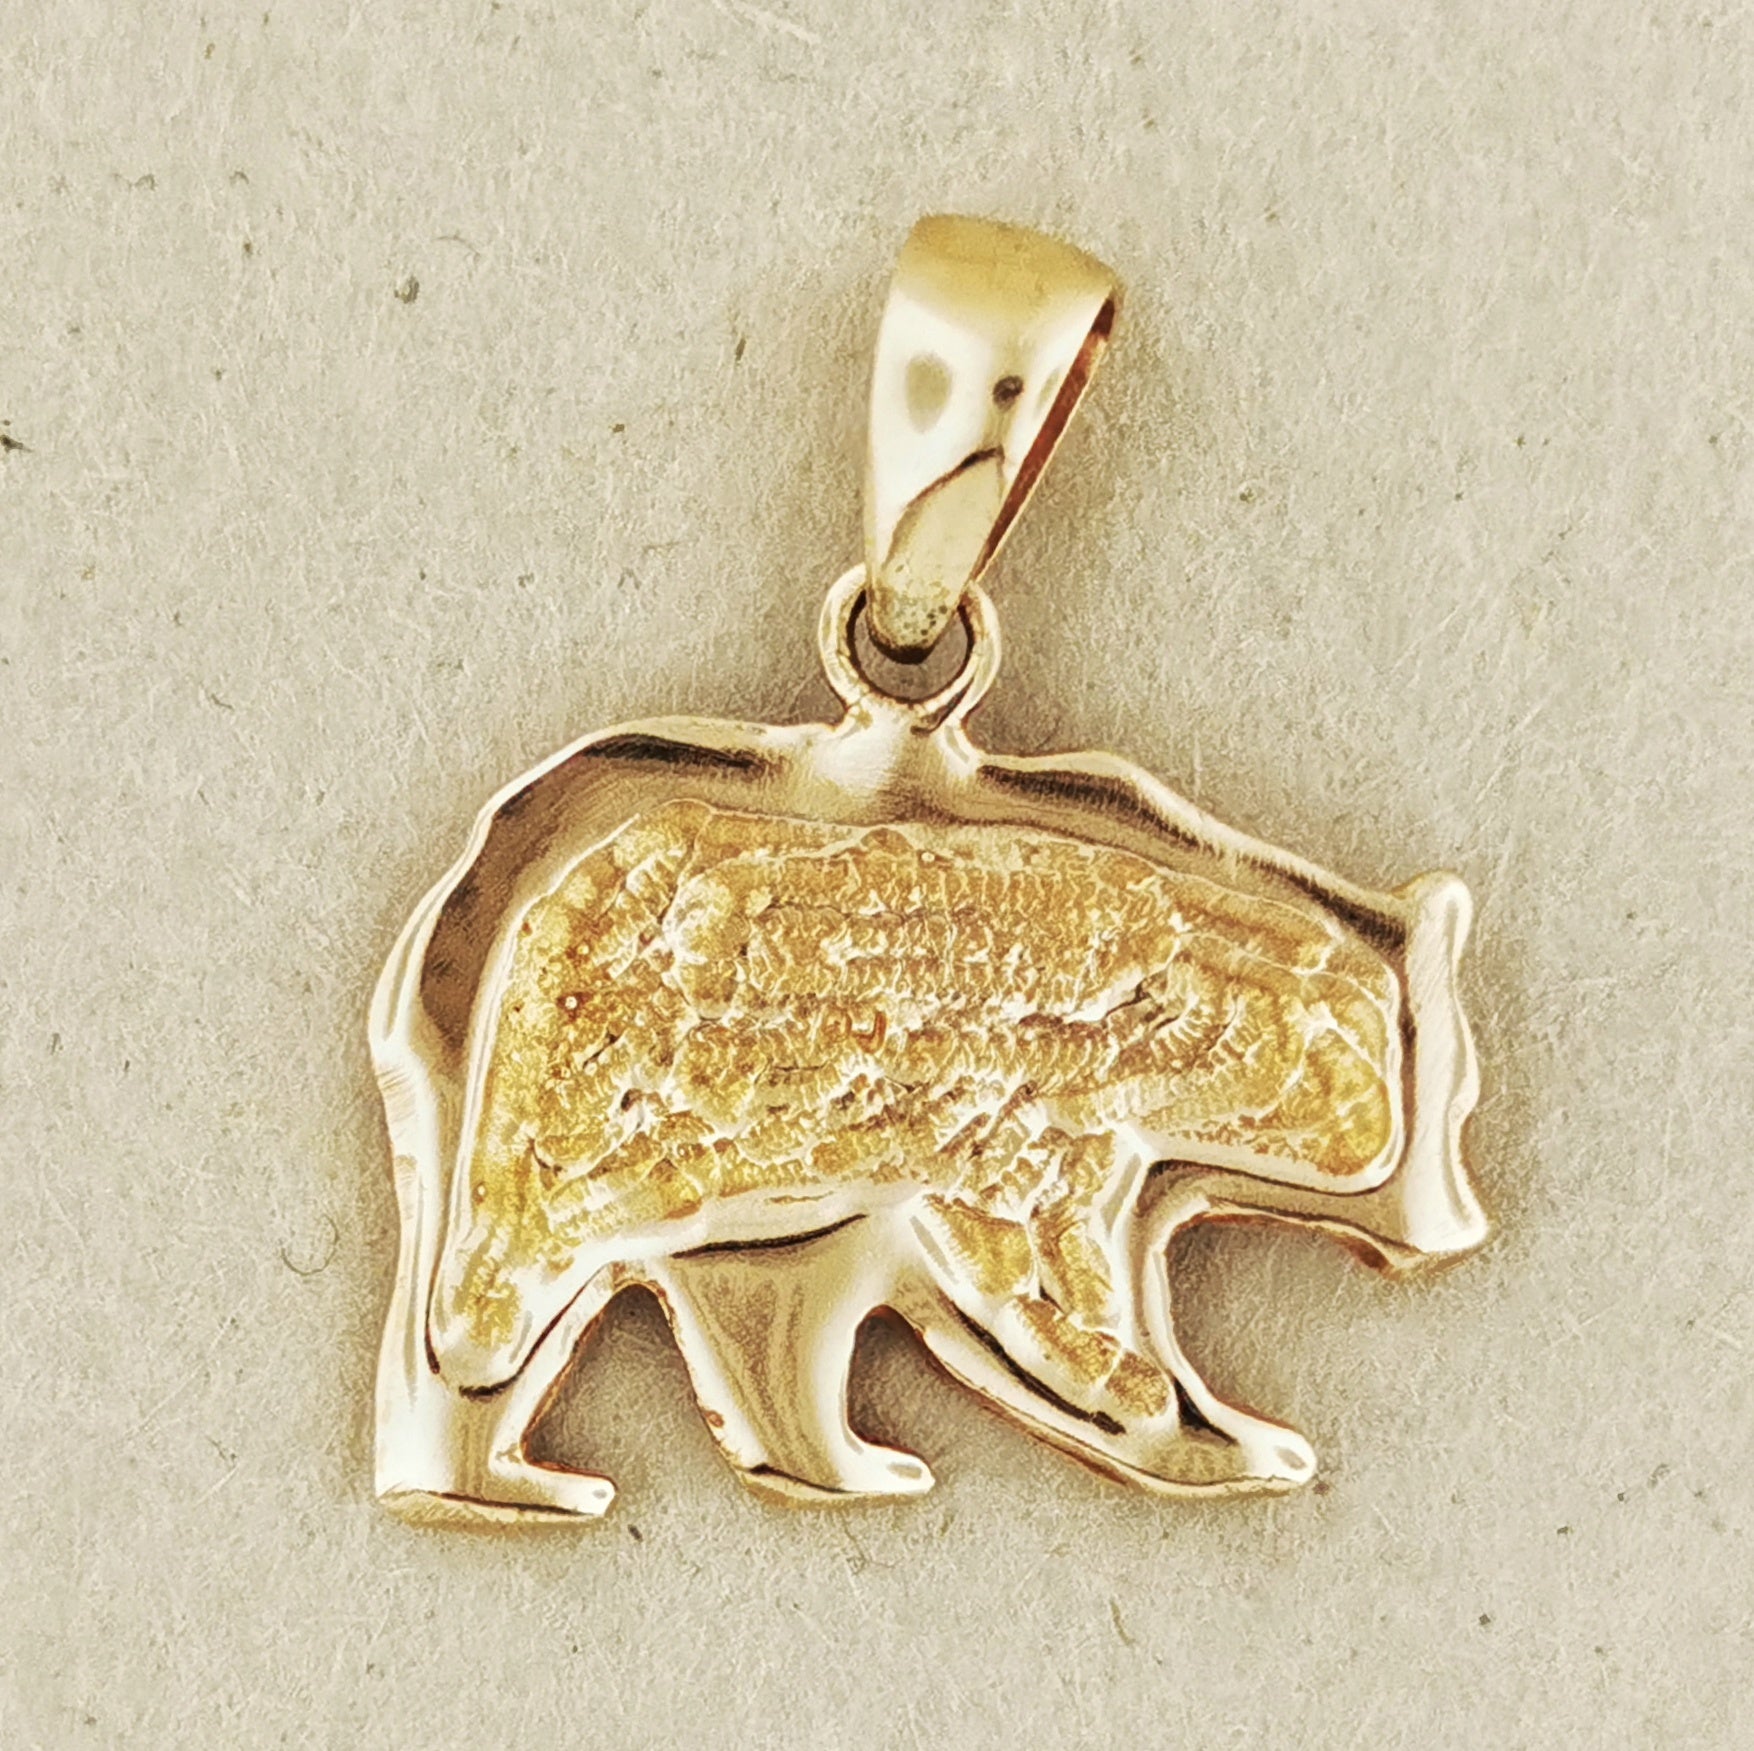 Bear Charm Pendant in 925 Silver or Bronze, Grizzley Bear Pendant Charm Necklace, Bear Totem Pendant, Bronze Bear Pendant, Bear Jewelry In Antique Bronze, Bear Totem Pendant, Bronze Animal Pendants, Bronze Bear Charm Pendant, Bronze Bear Necklace